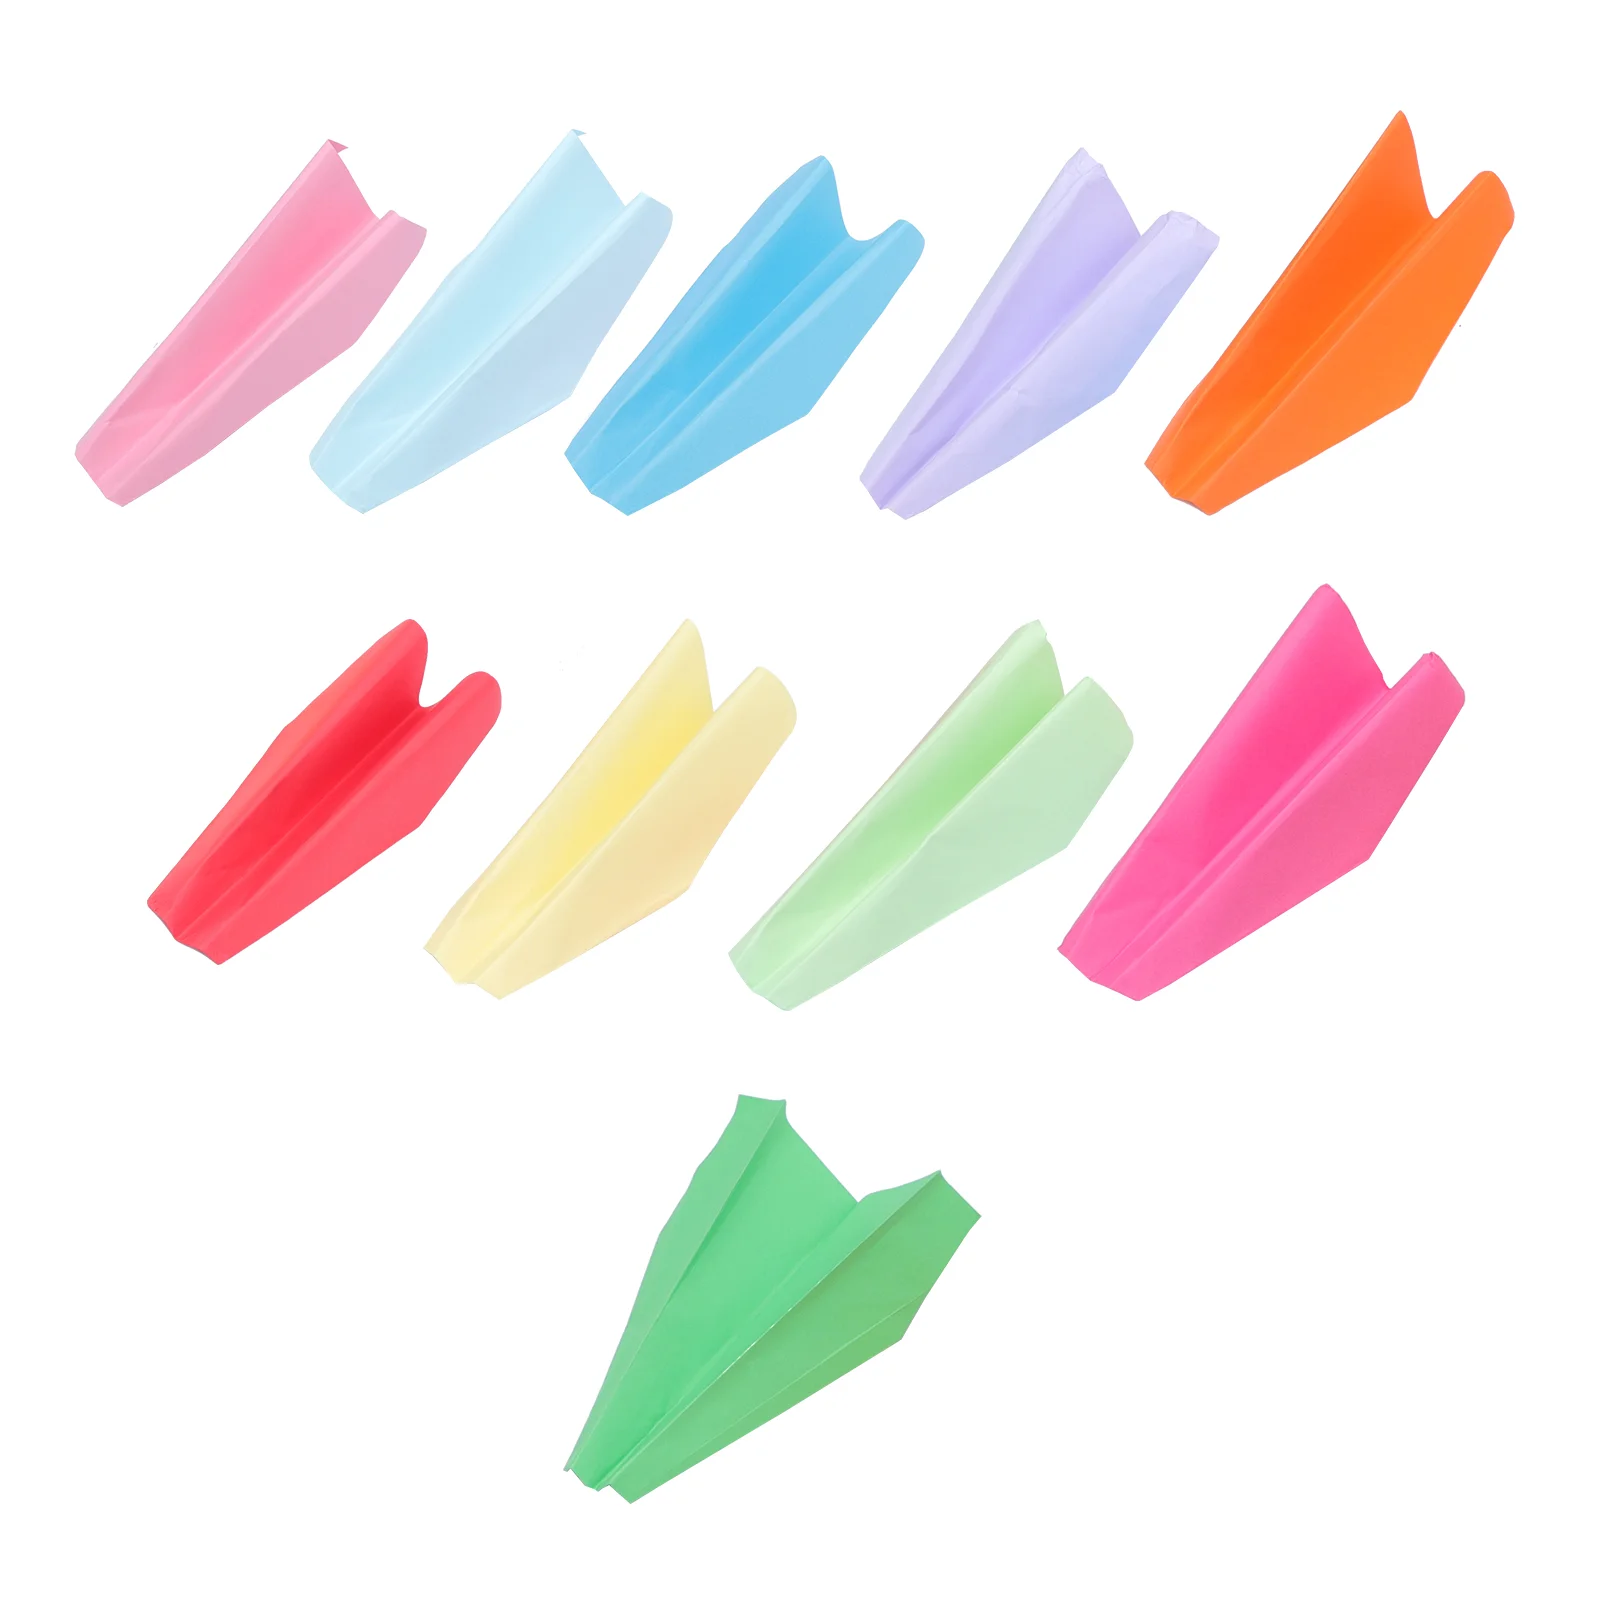 

100 Pcs Party Atmosphere Props Colored Paper Plane Toys Origami Kids Playset Handmade Decorative Toddler Japanese